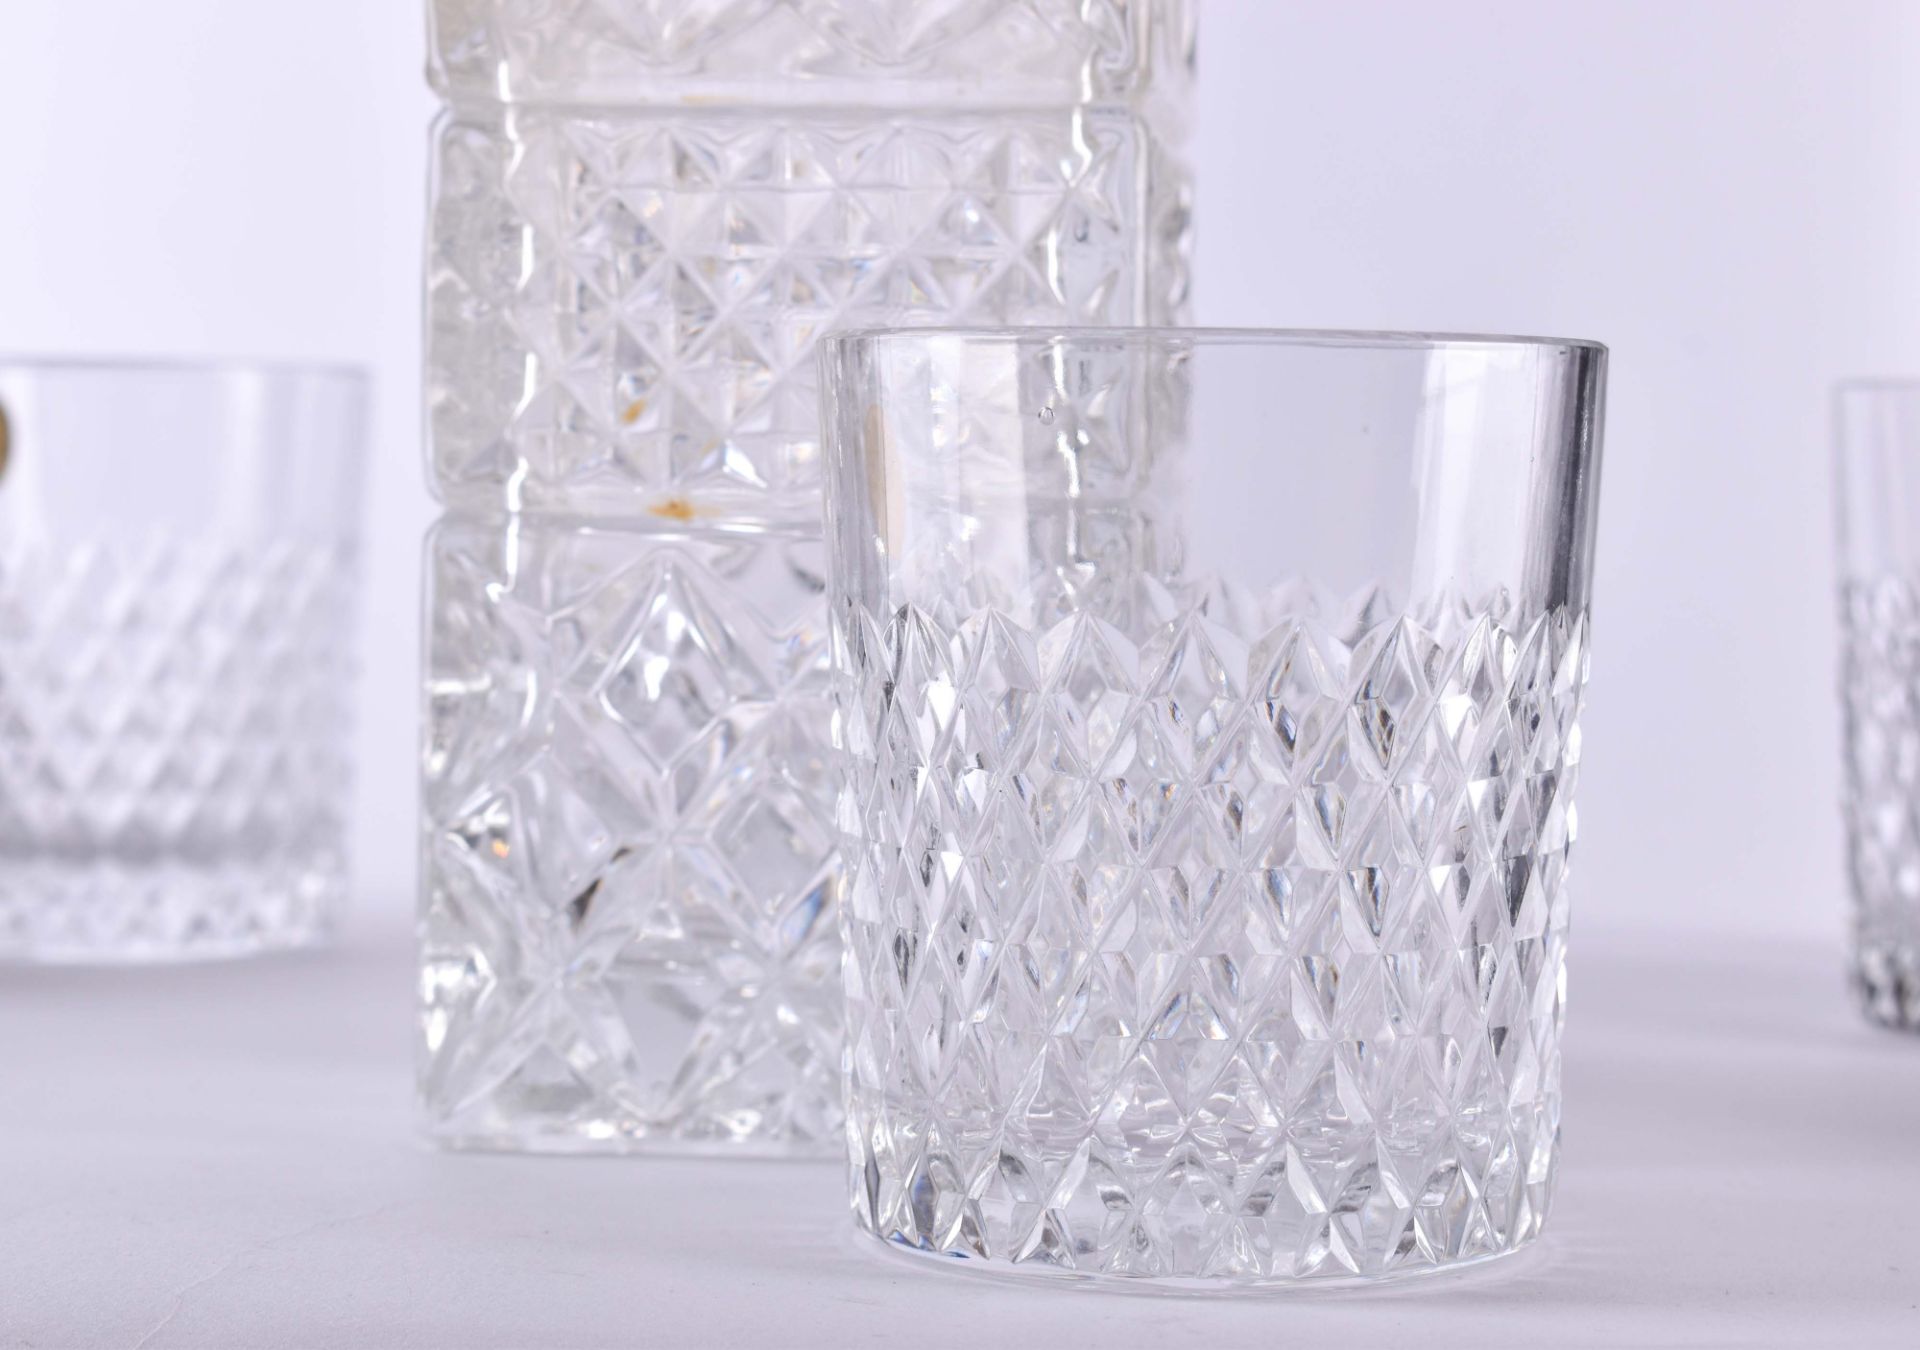 Whiskey carafe with 6 glasses - Image 2 of 5